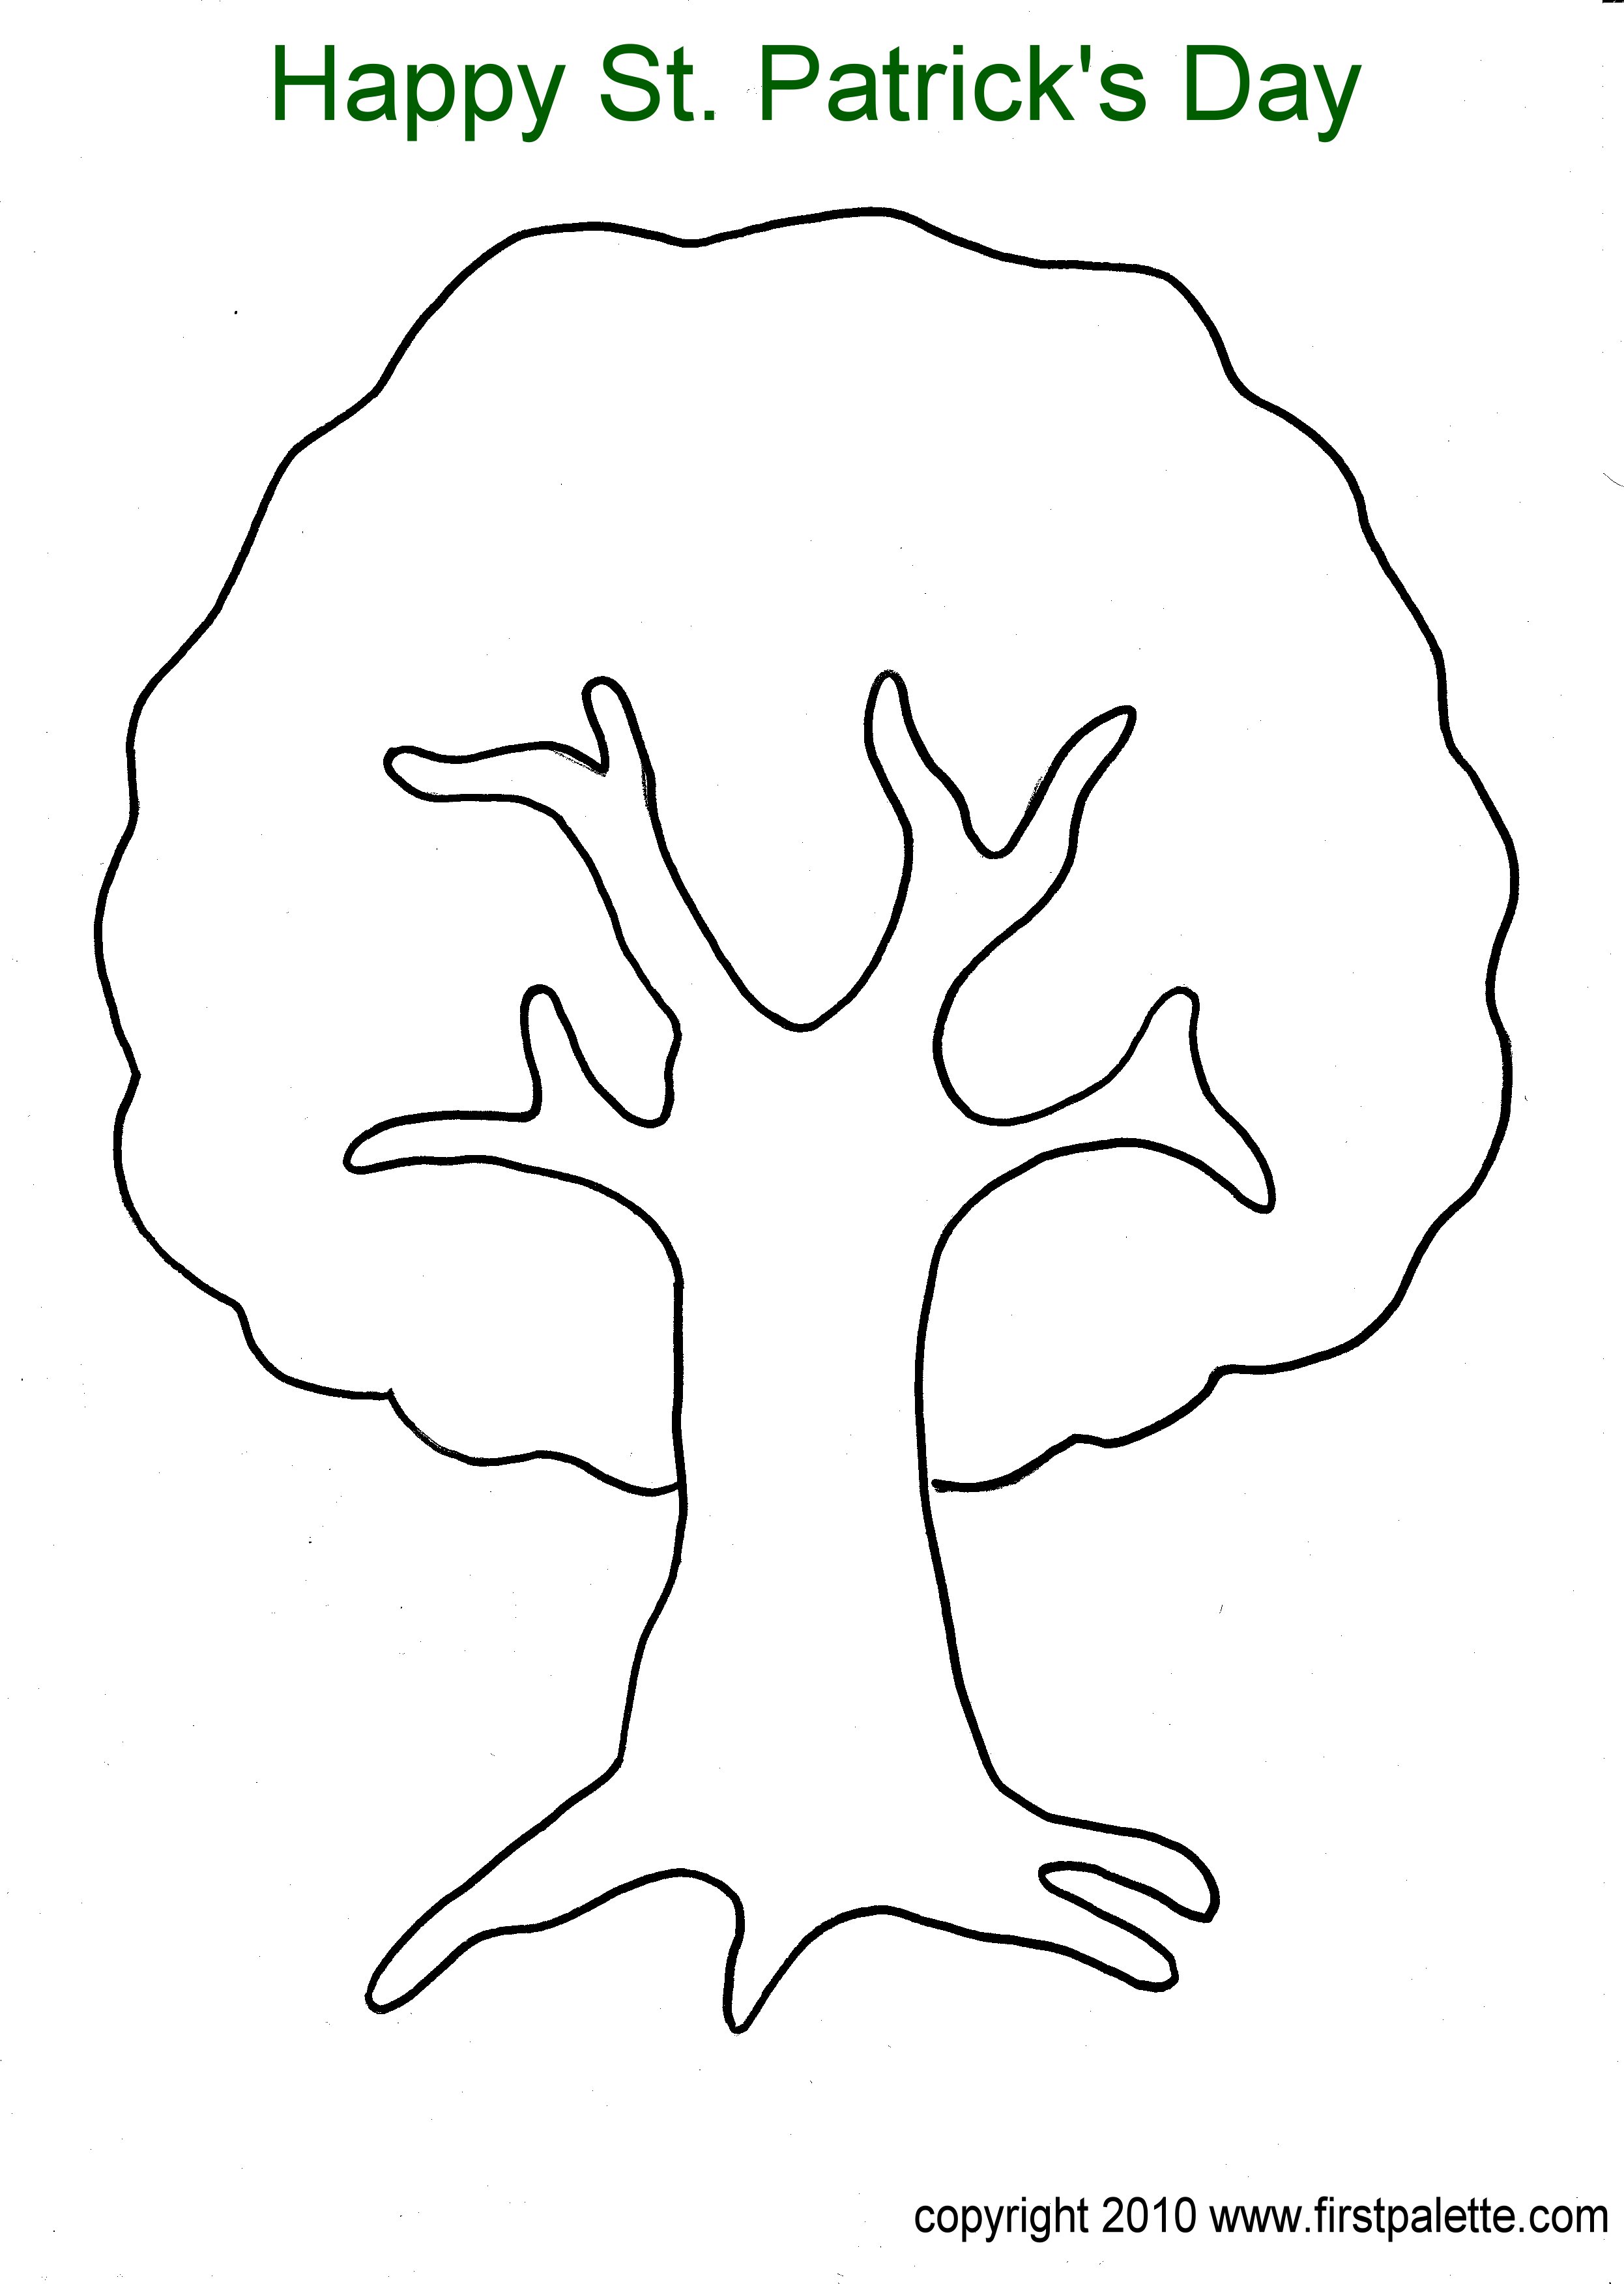 printable-picture-of-a-tree